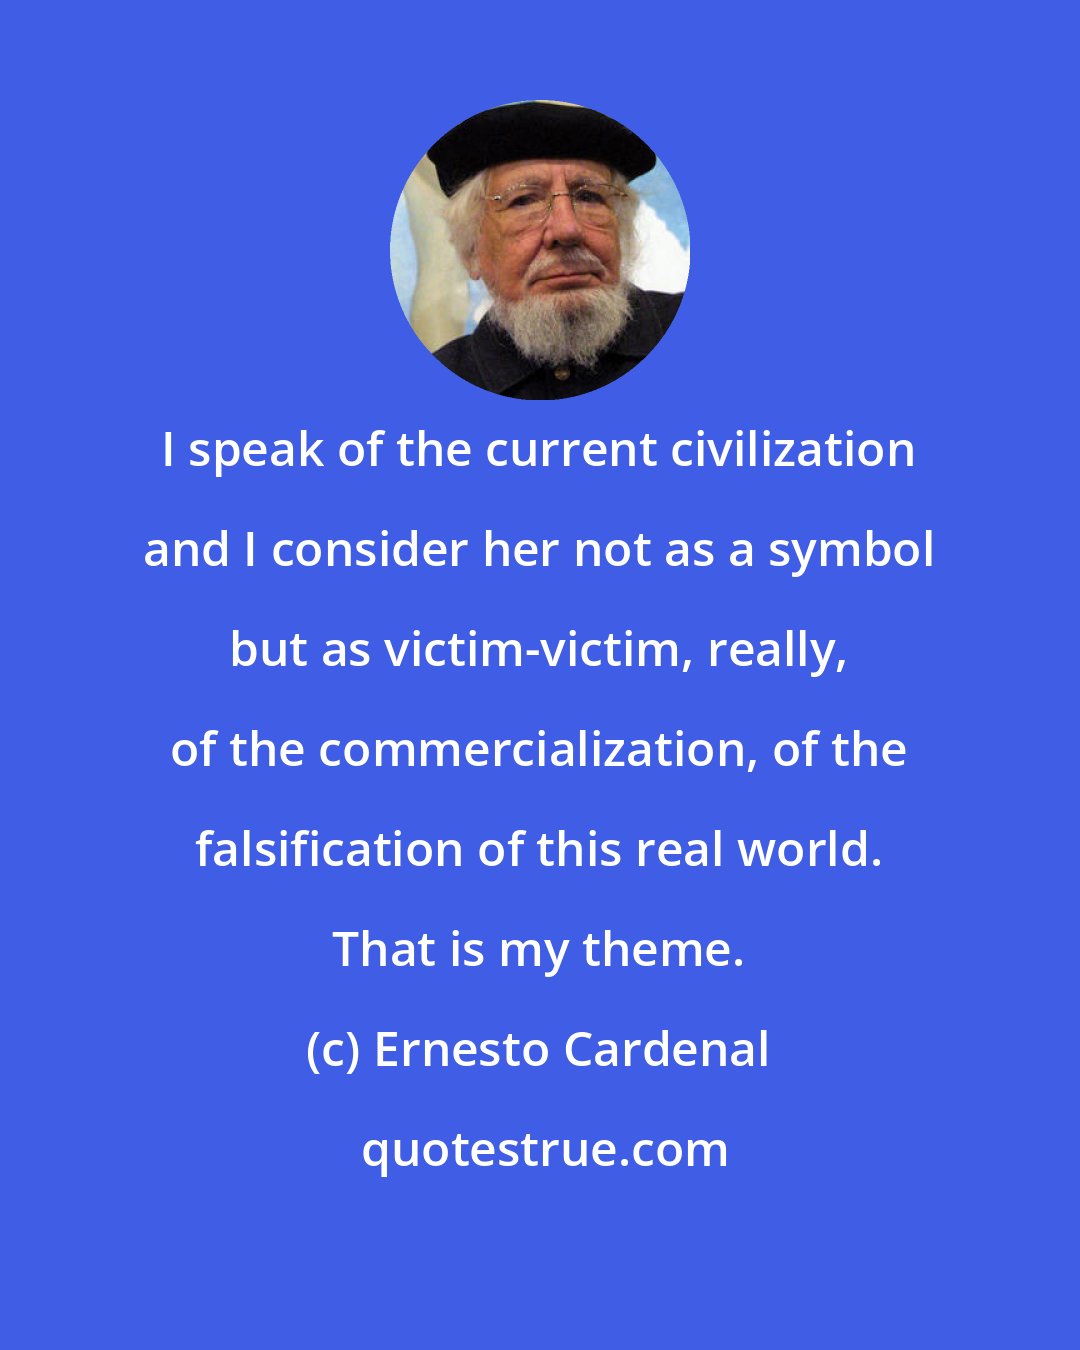 Ernesto Cardenal: I speak of the current civilization and I consider her not as a symbol but as victim-victim, really, of the commercialization, of the falsification of this real world. That is my theme.